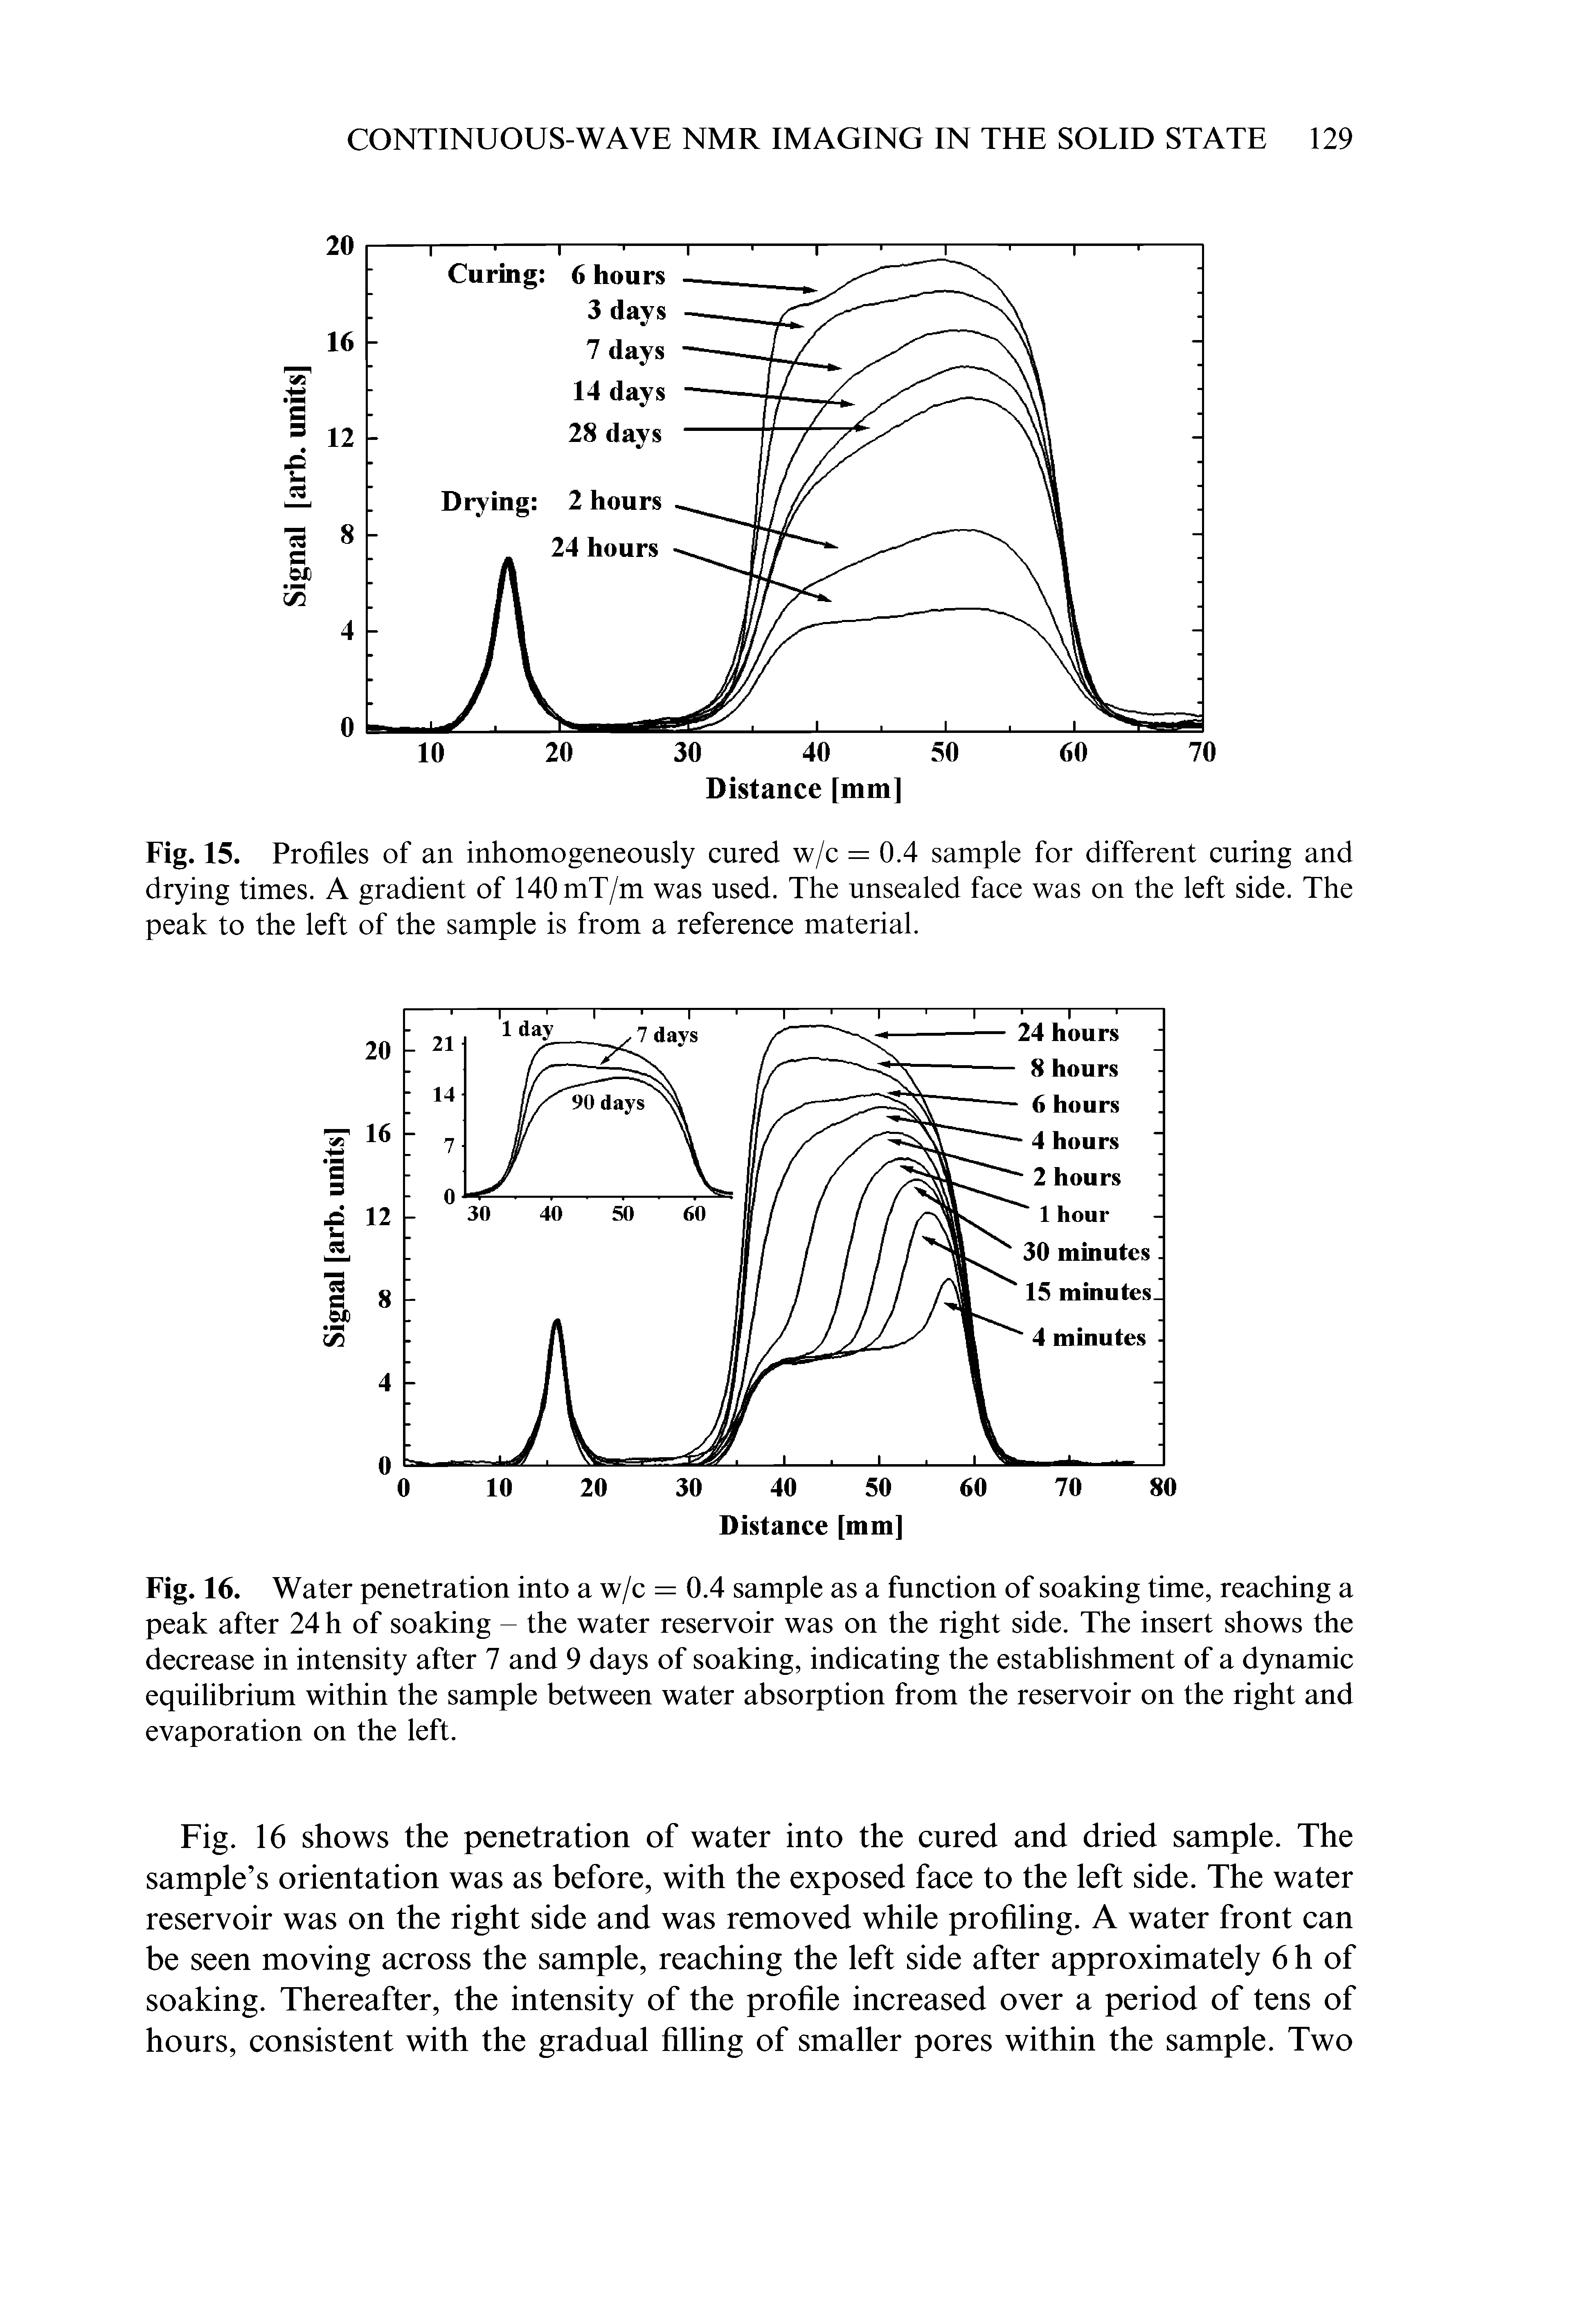 Fig. 16. Water penetration into a w/c = 0.4 sample as a function of soaking time, reaching a peak after 24 h of soaking - the water reservoir was on the right side. The insert shows the decrease in intensity after 7 and 9 days of soaking, indicating the establishment of a dynamic equilibrium within the sample between water absorption from the reservoir on the right and evaporation on the left.